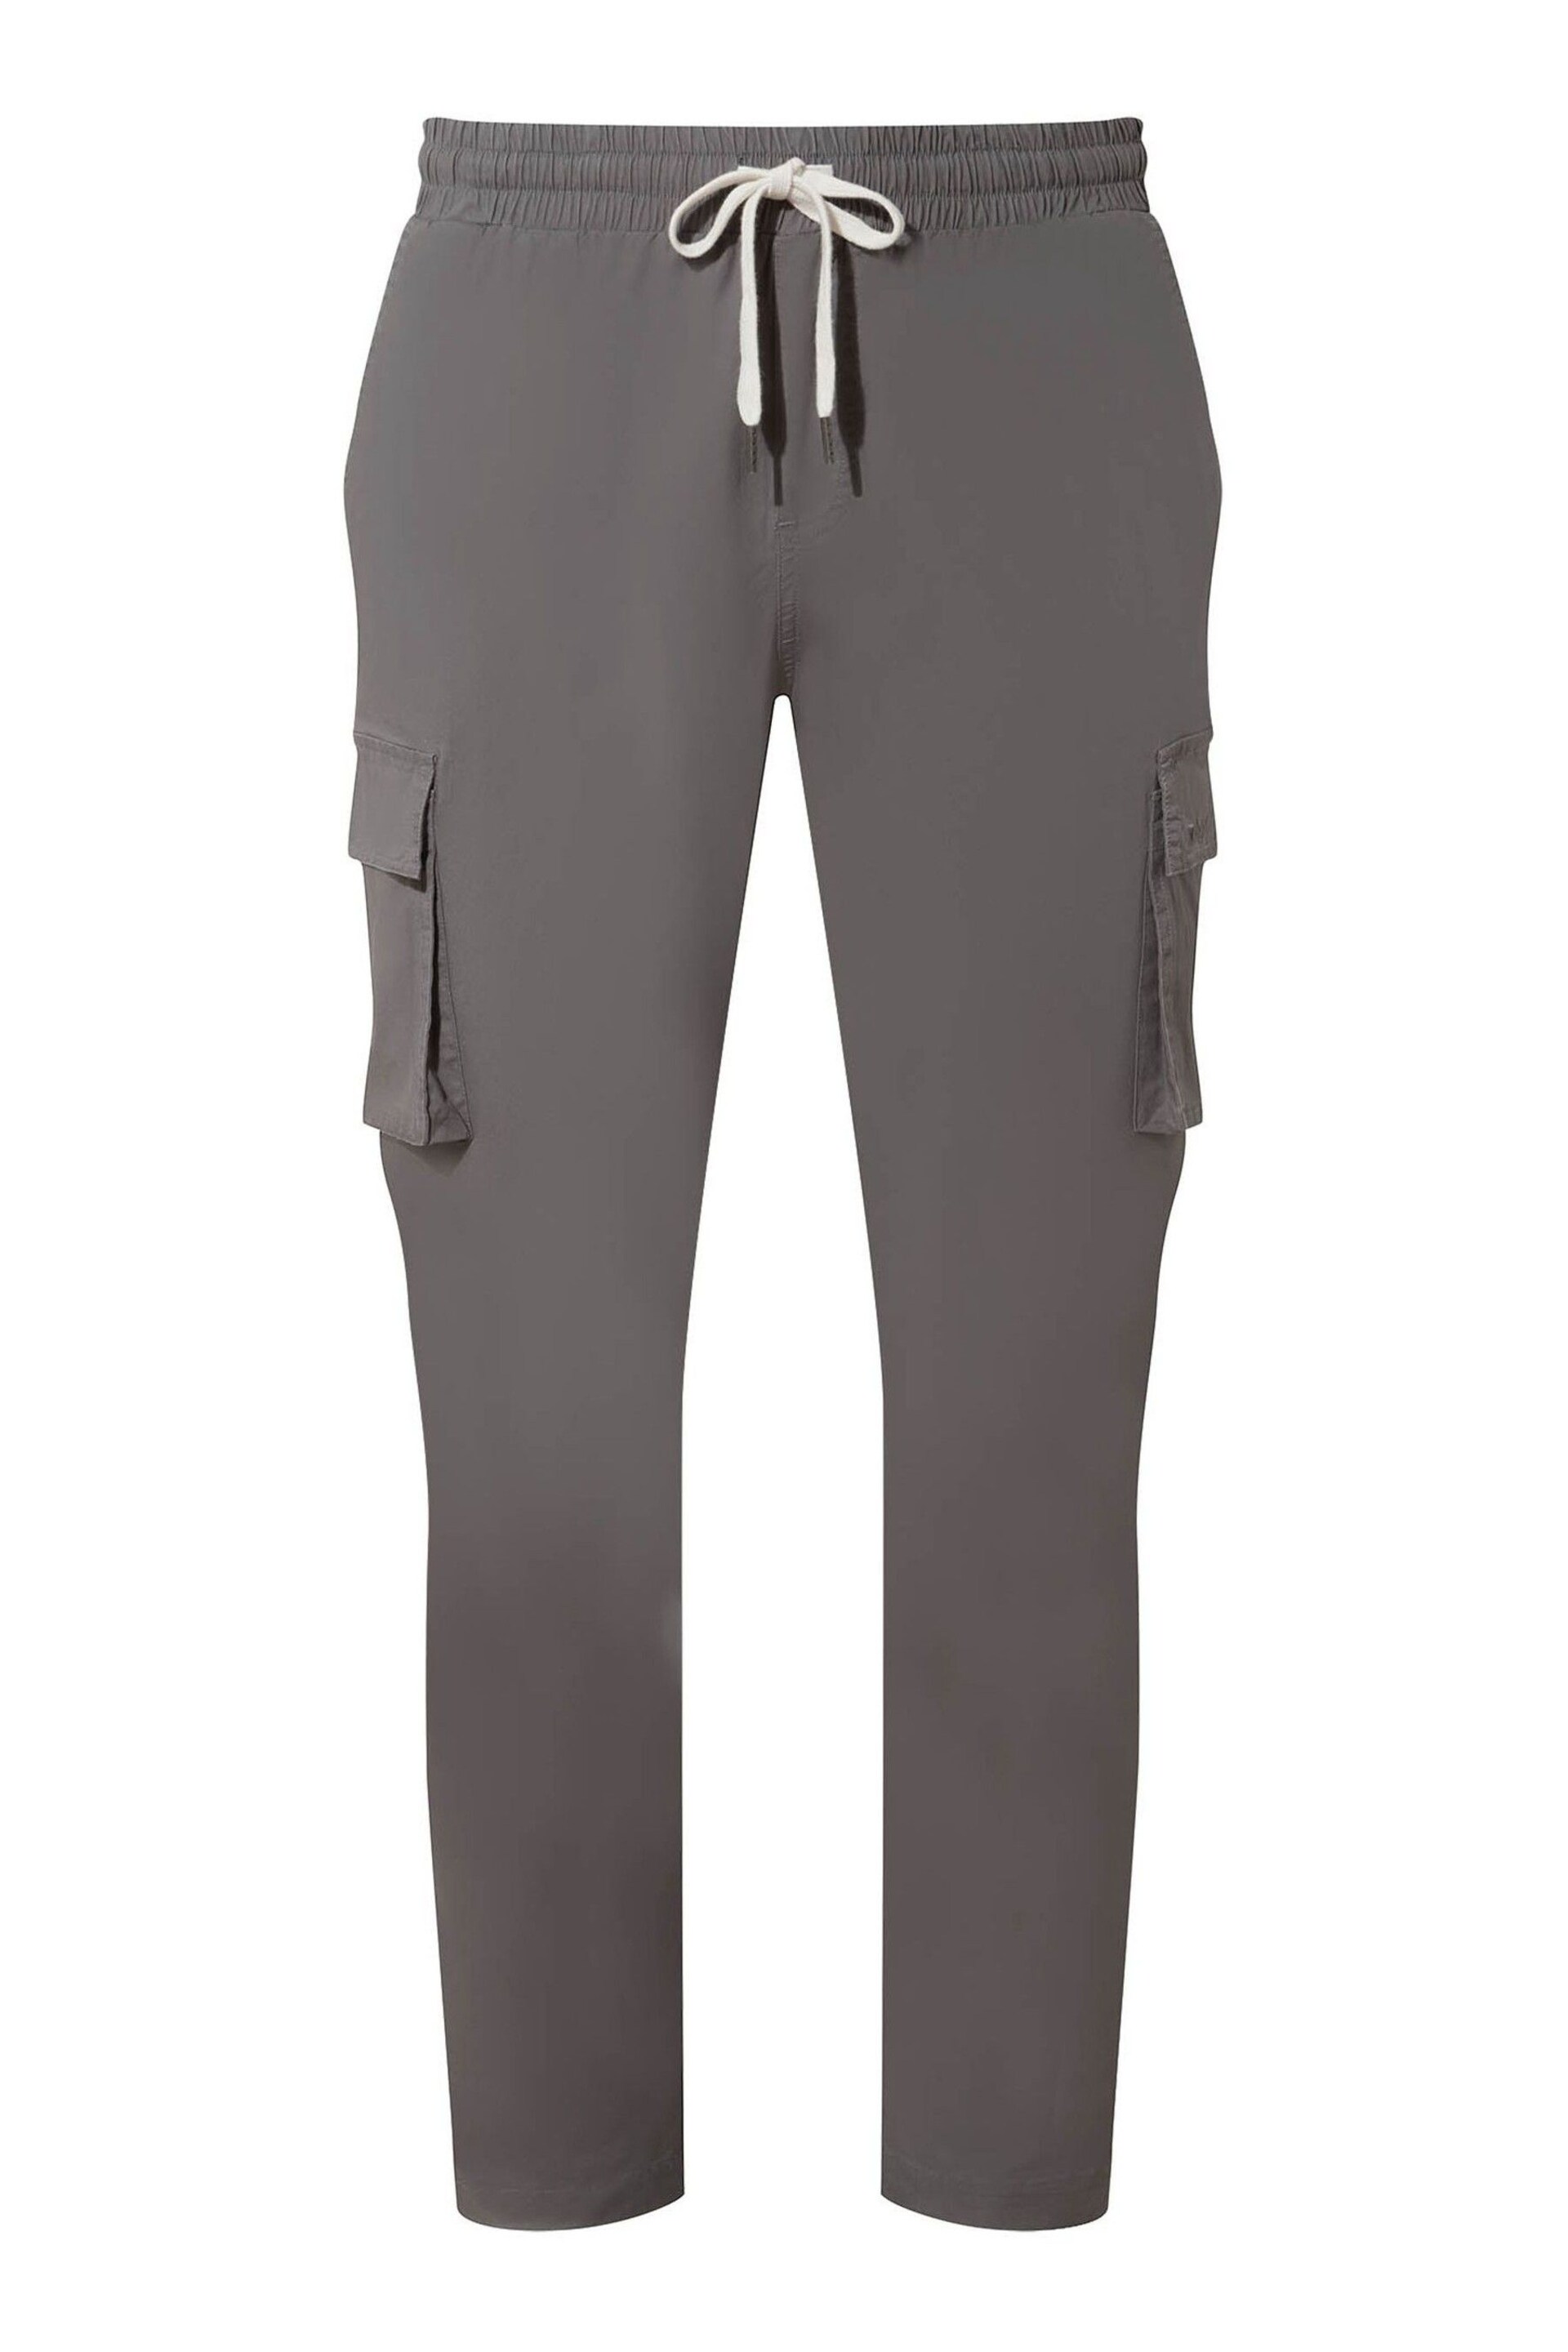 Tog 24 Grey Silas Cargo Trousers - Image 5 of 5